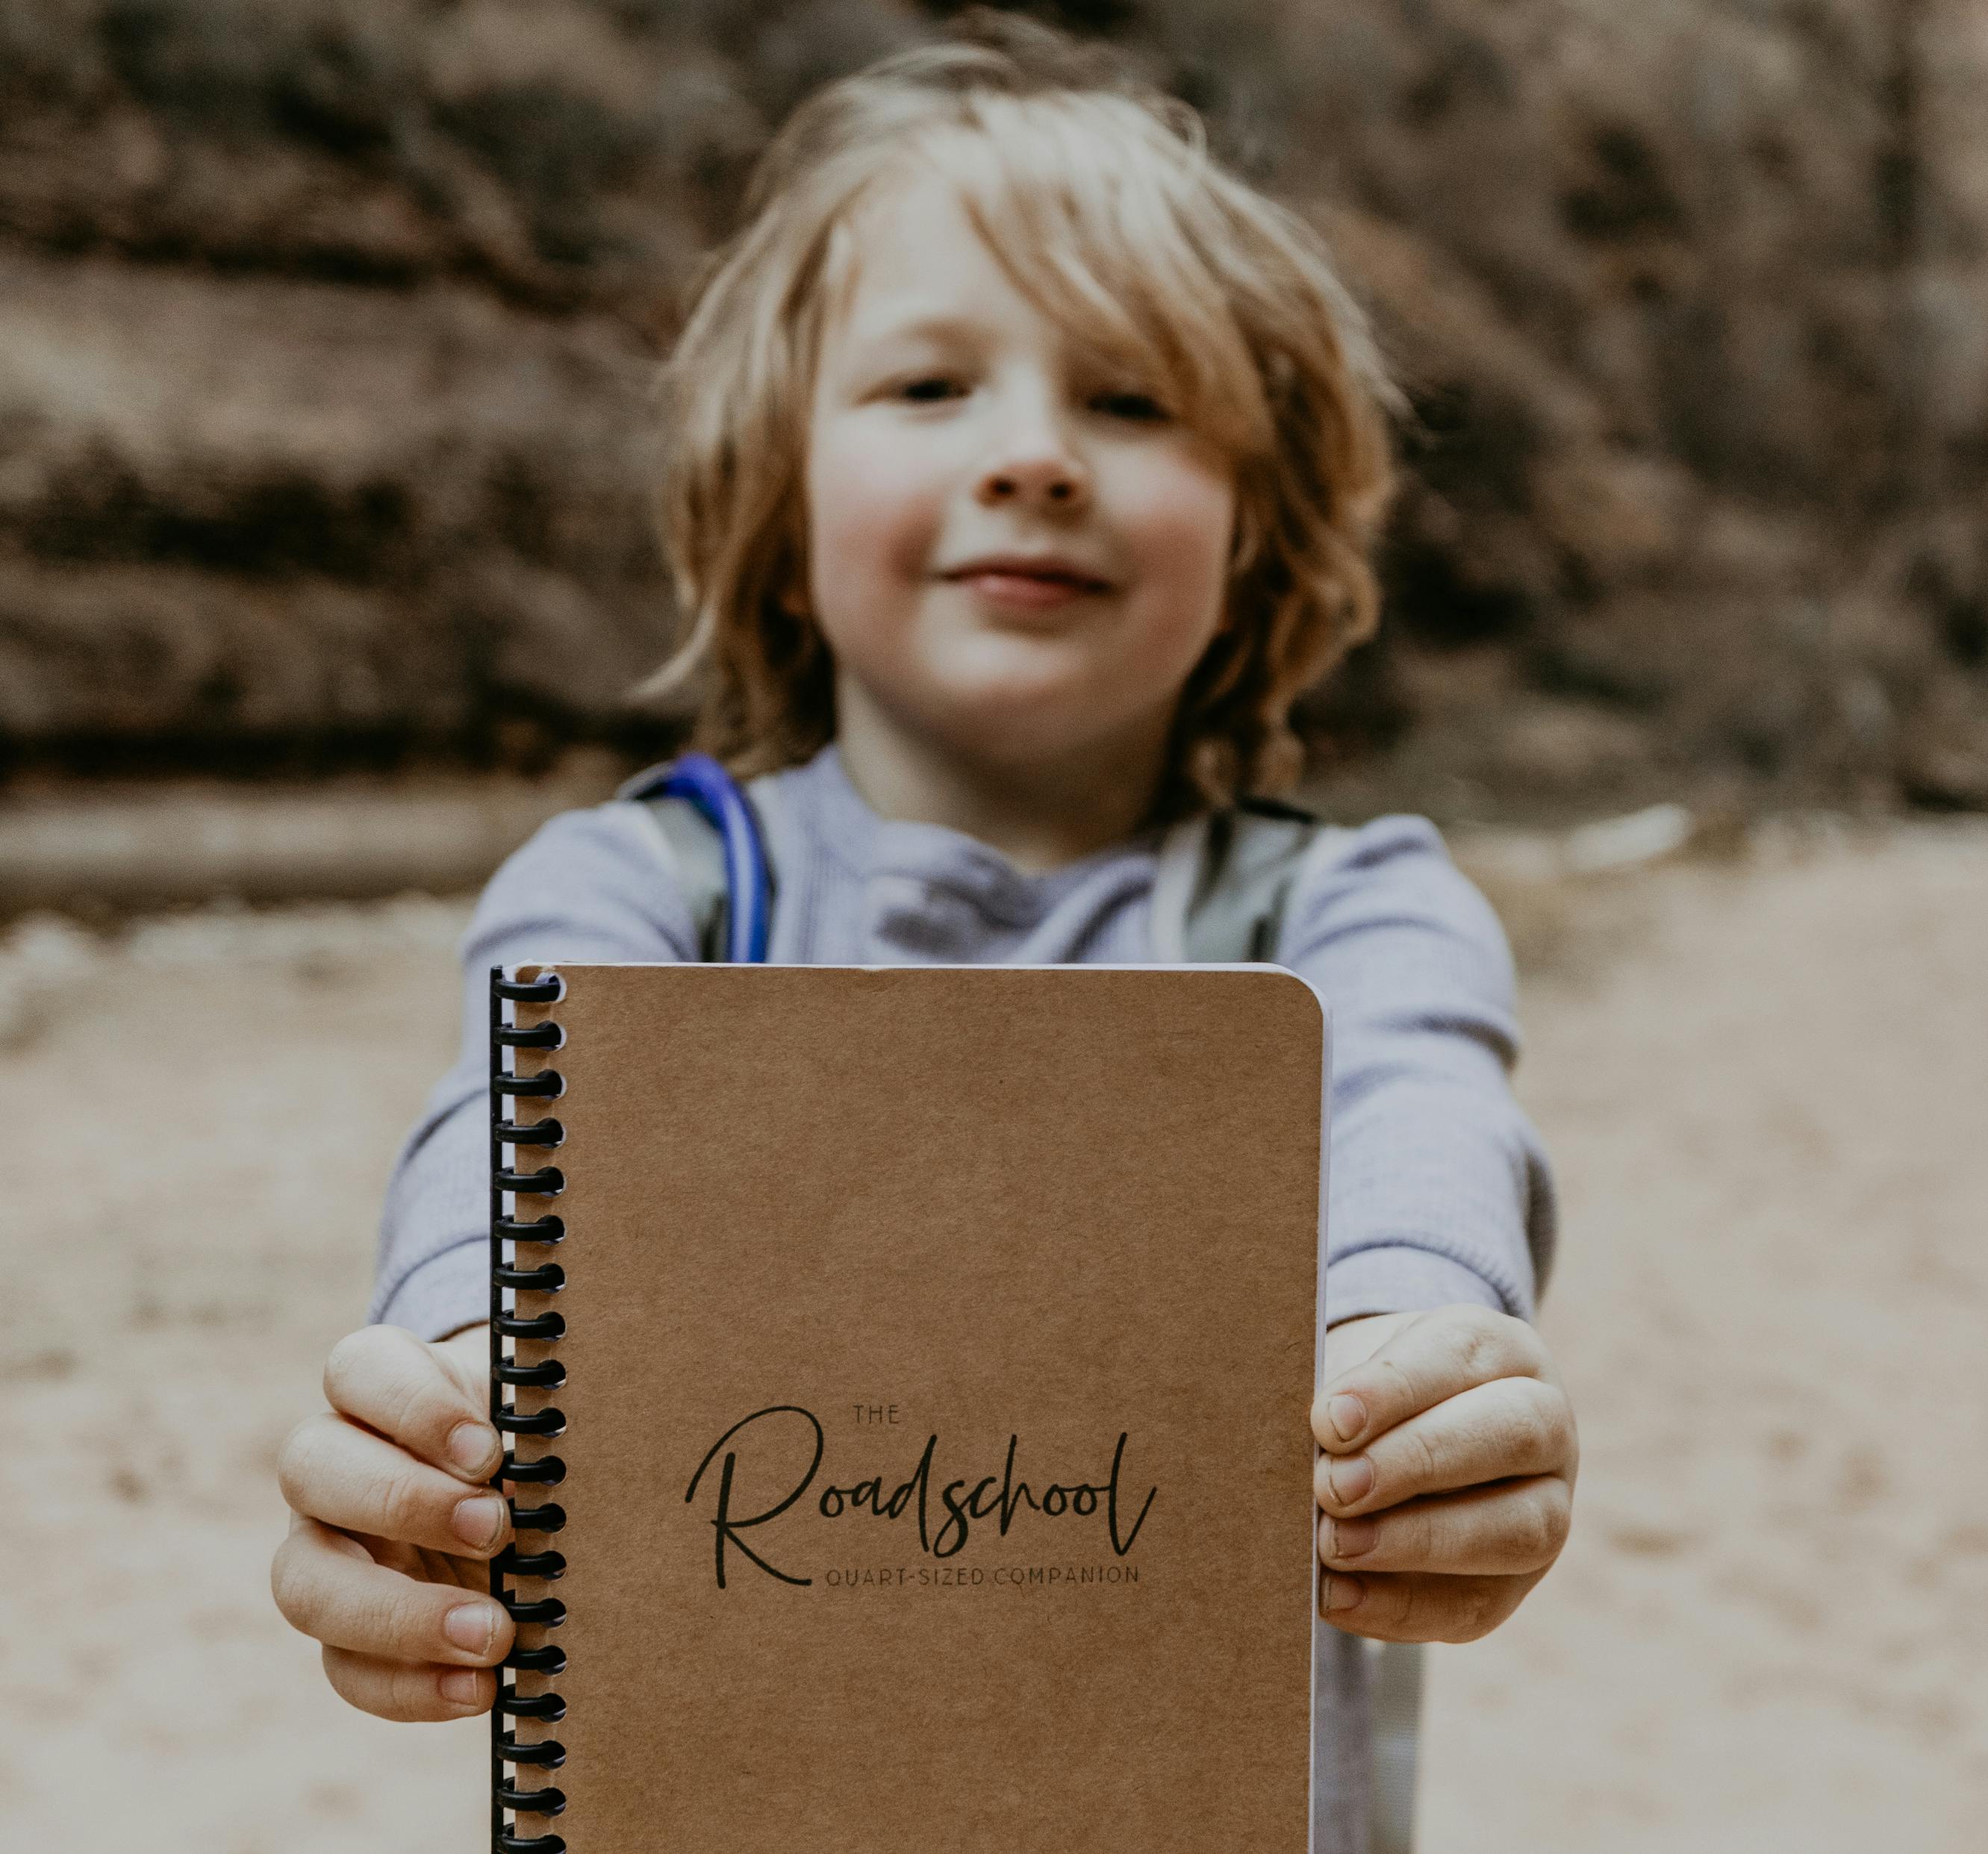 Andy and Kristen Murphey's son holding up a Roadschooling Notebook